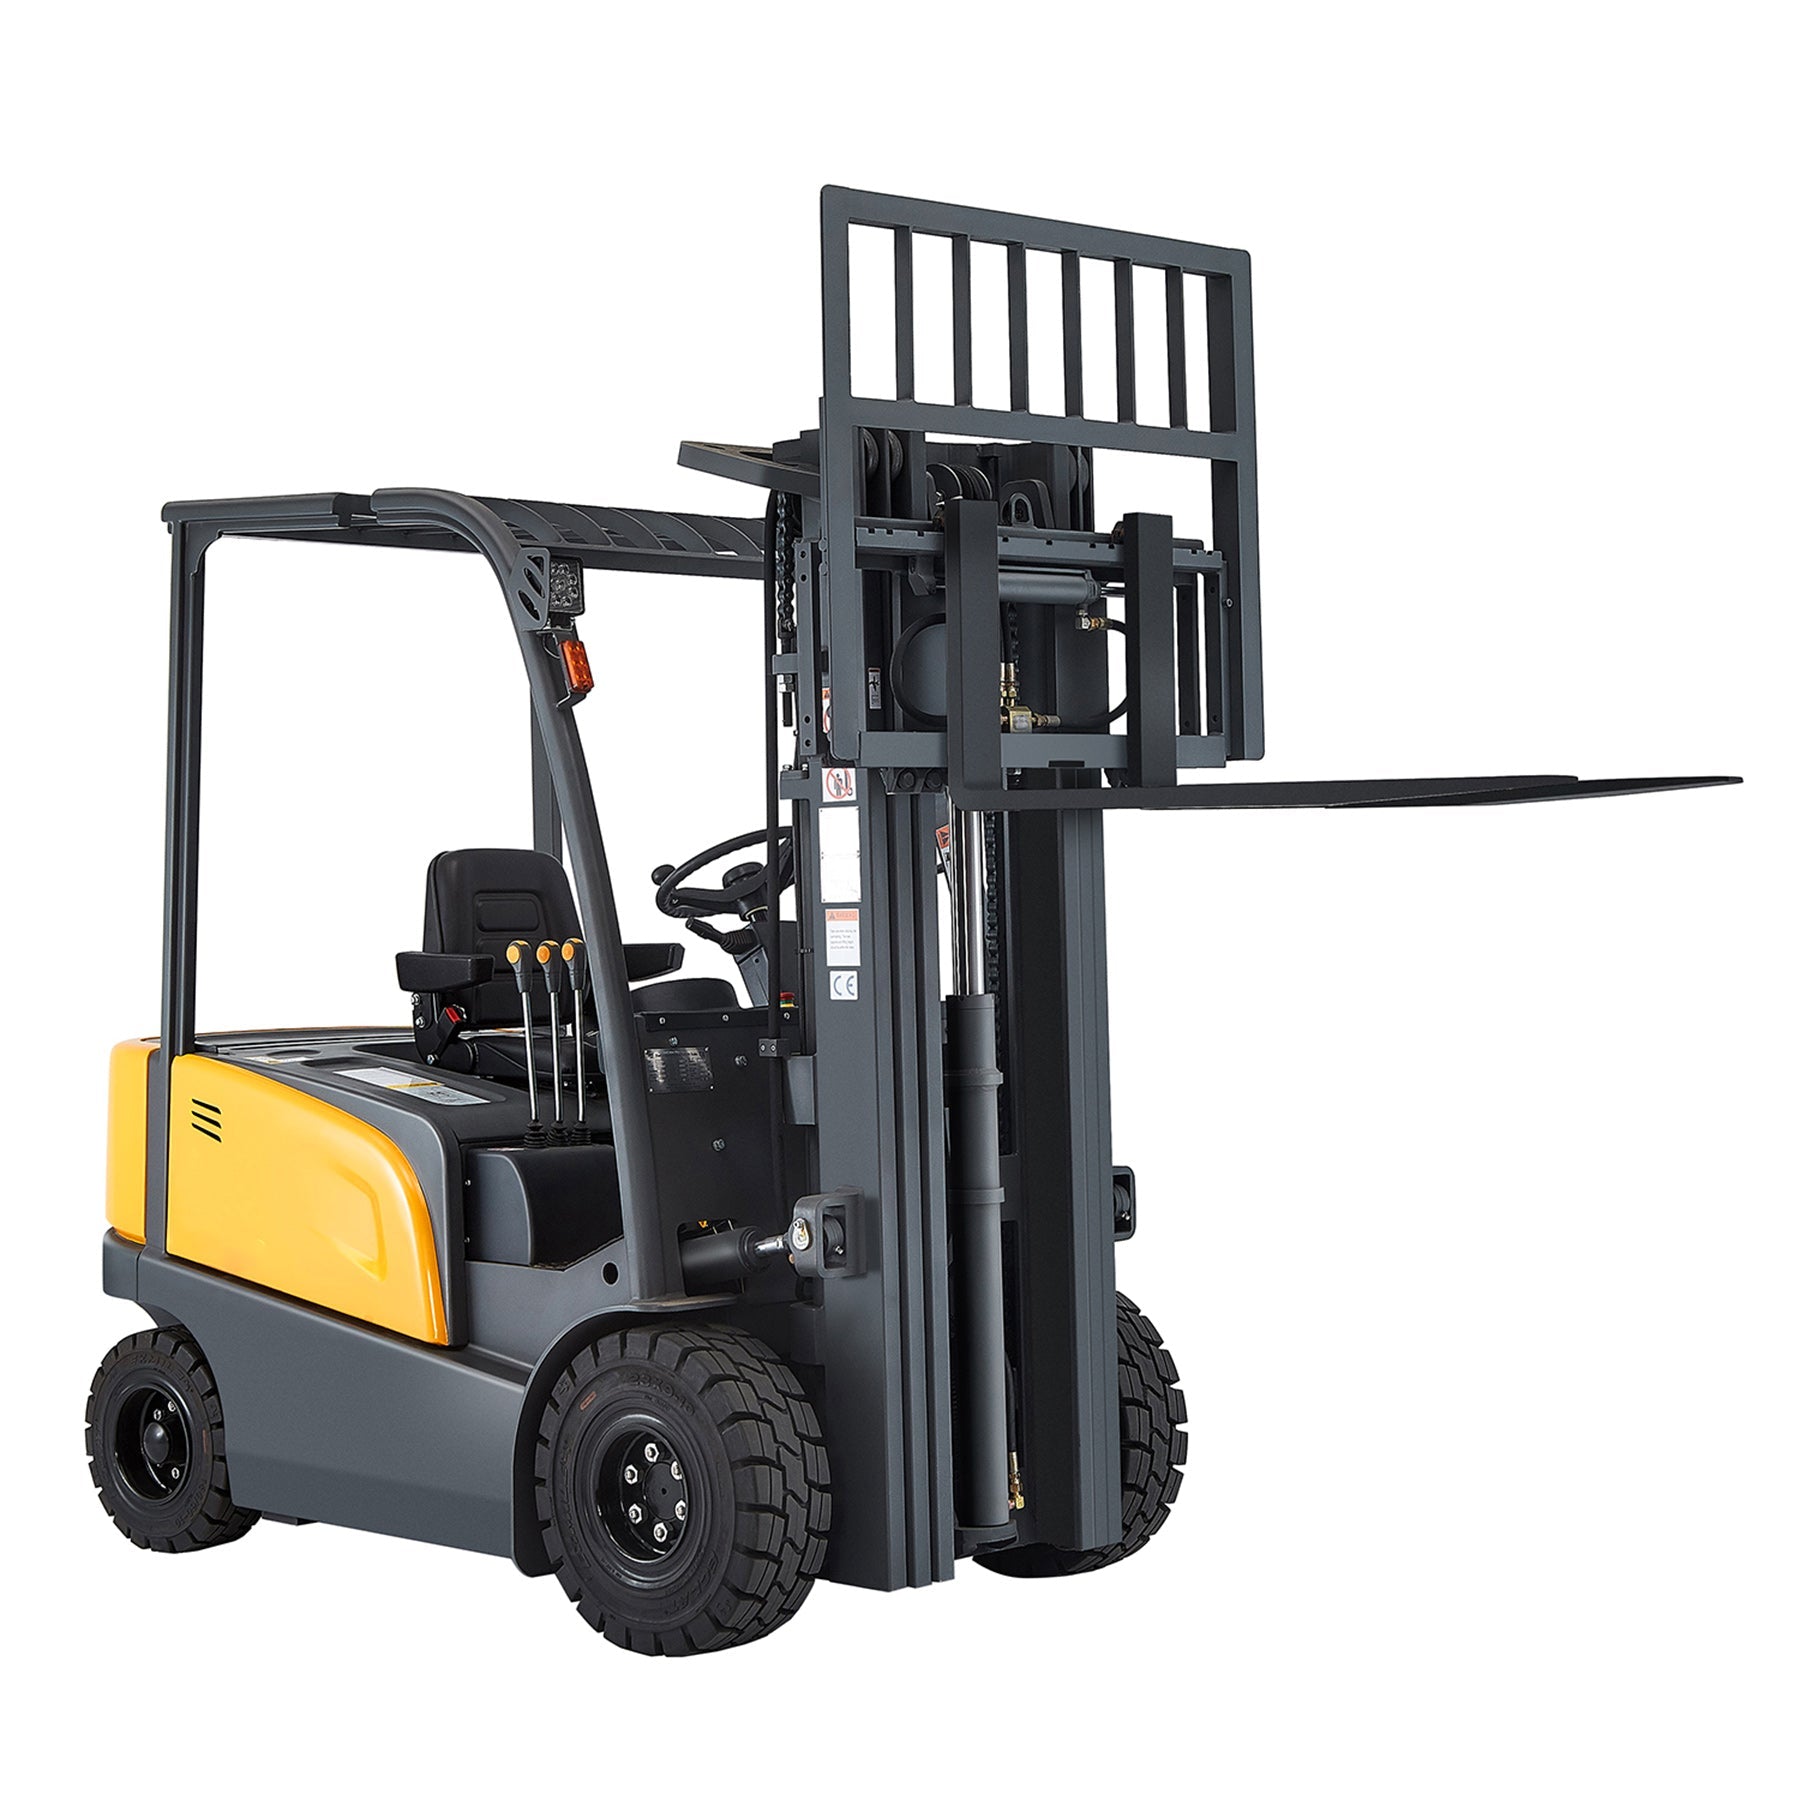 ApolloLift | Lithium Battery 4-wheel Electric Forklift 5500lbs Cap. 197" Lifting